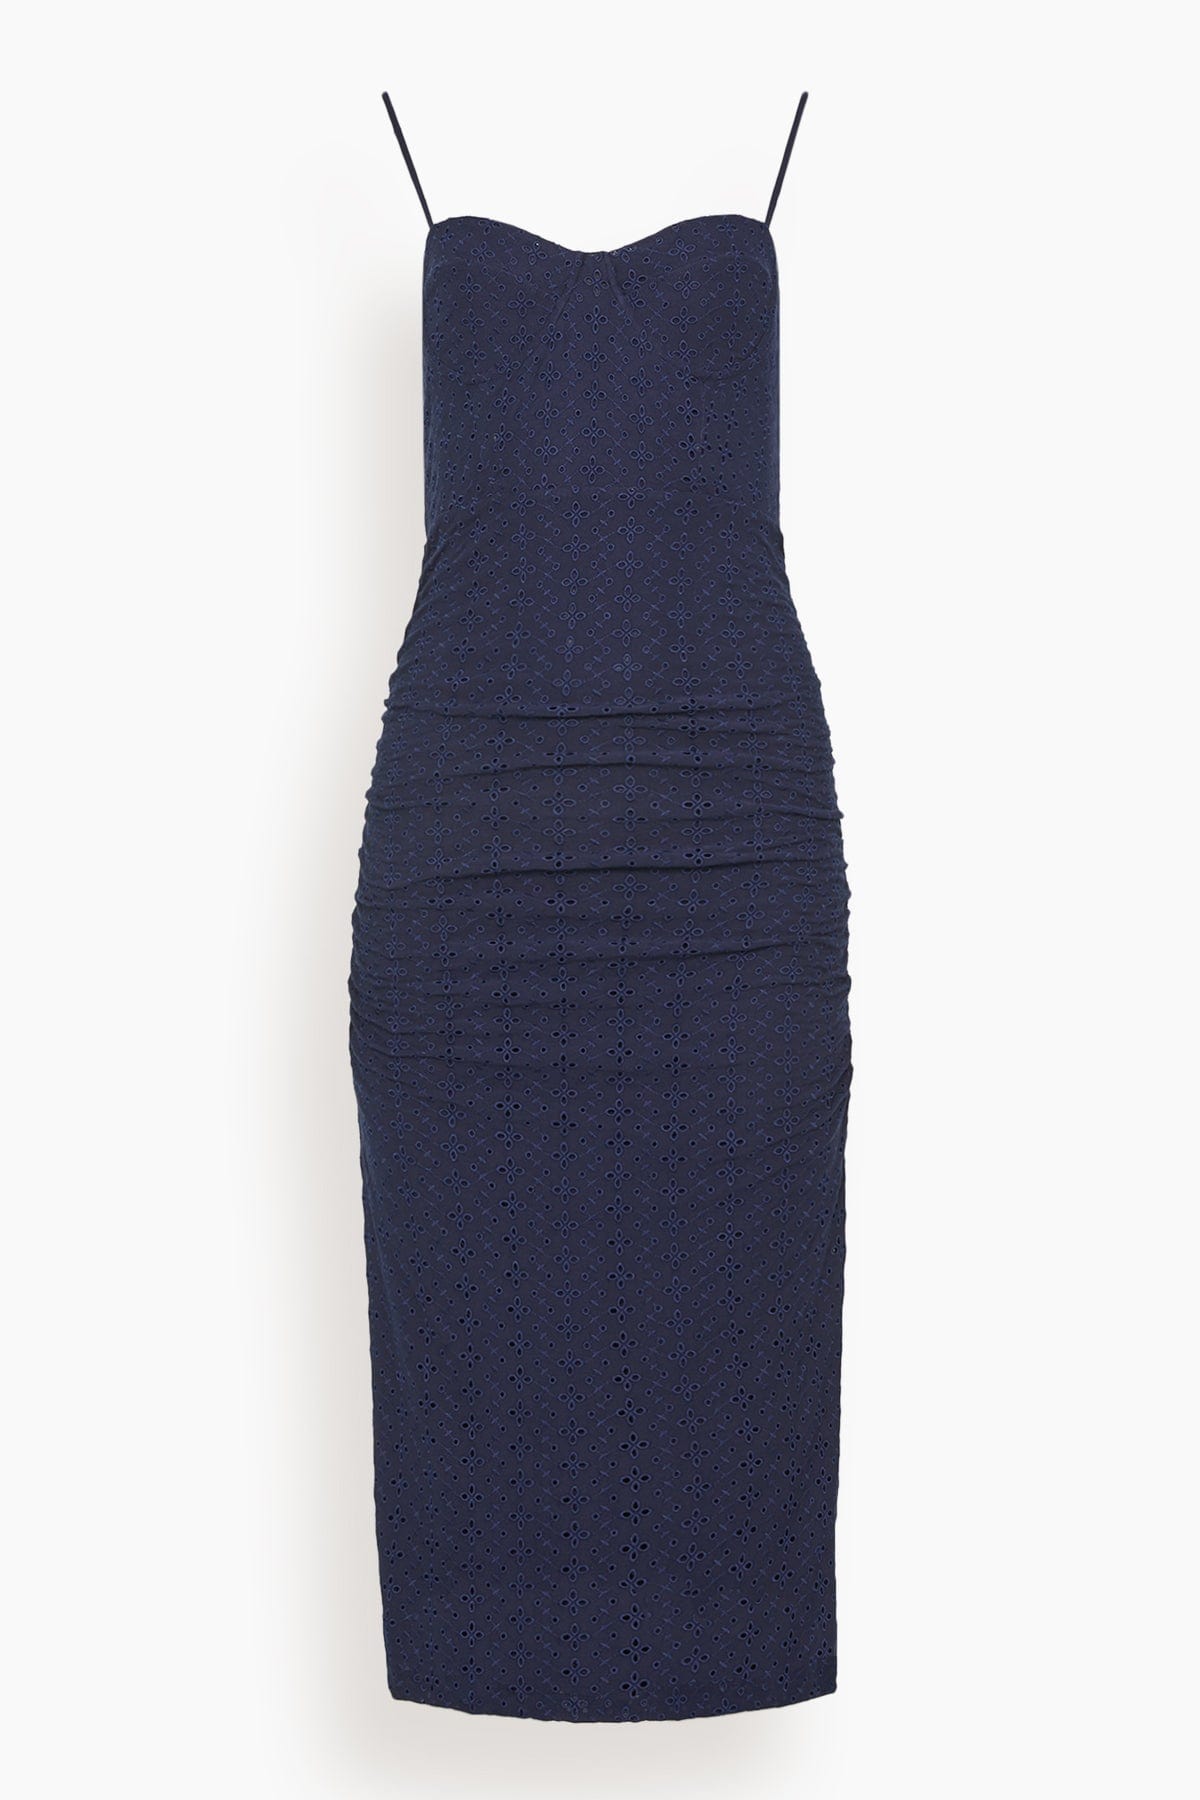 Simkhai Moira Broderie Anglaise Bustier Midi Dress in Midnight - Blue - Size: XS